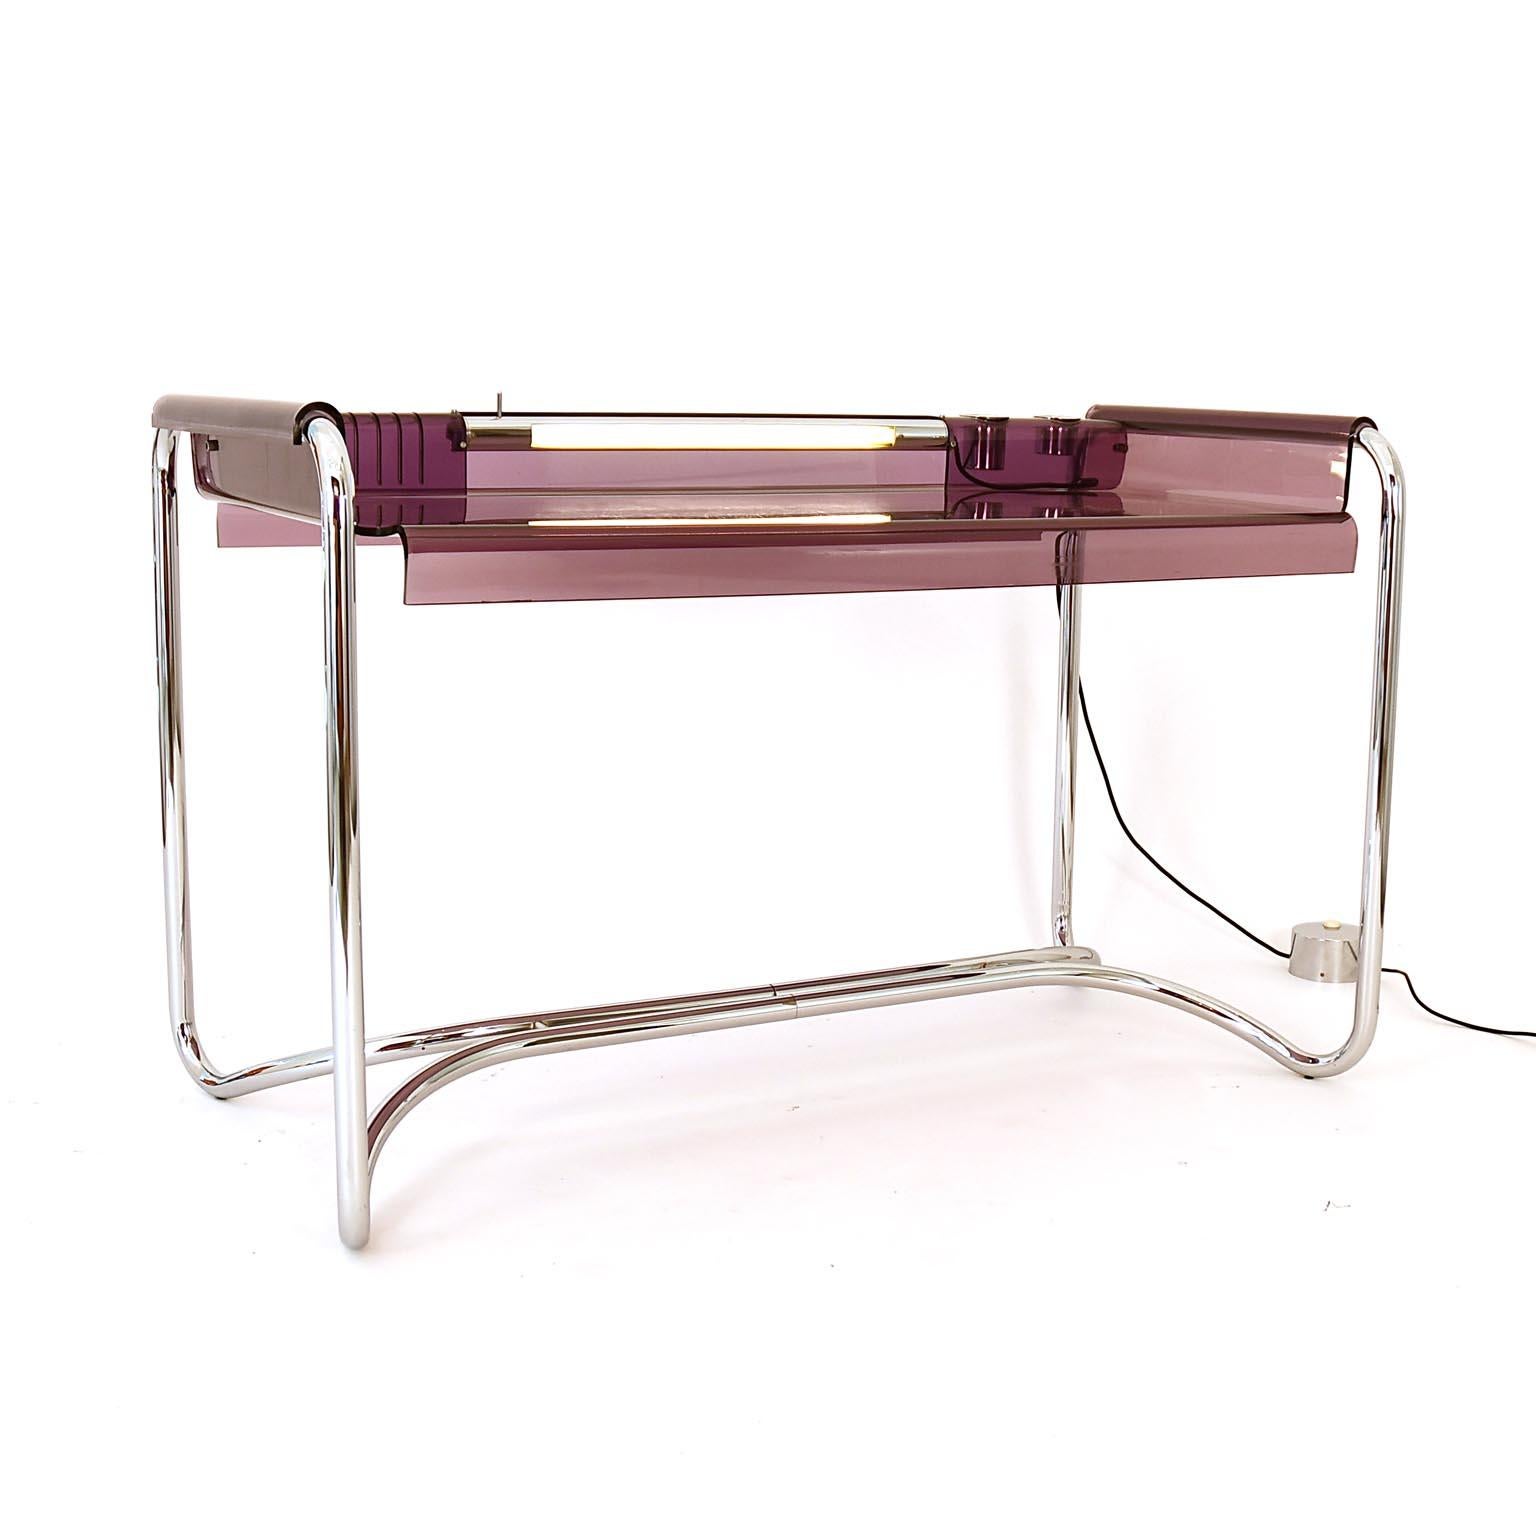 Mid-Century Modern Fabio Lenci Desk with Chair and Lamp by Formes Nouvelles, 1970s Italy Chrome